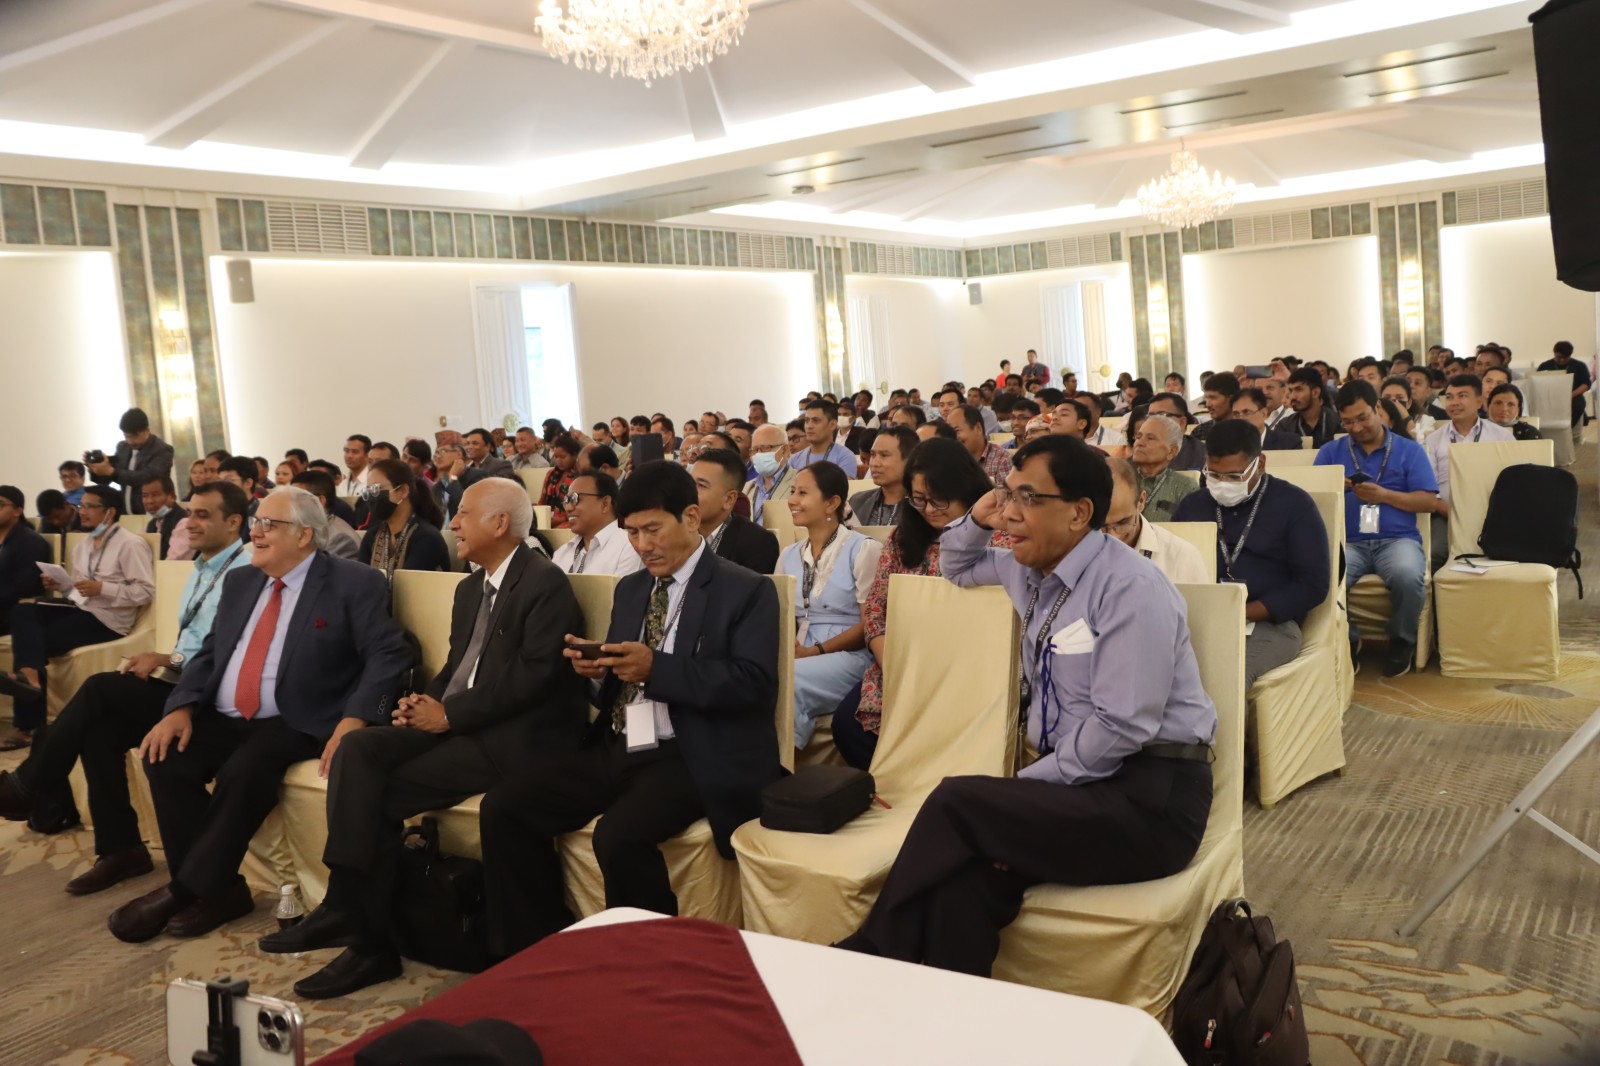 In association with the Kathmandu-based churches, the Billy Graham Evangelistic Association hosted a one-day "Leadership Summit Nepal" on August 31 at the Himalayan Hotel in Kupandol, Lalitpur.